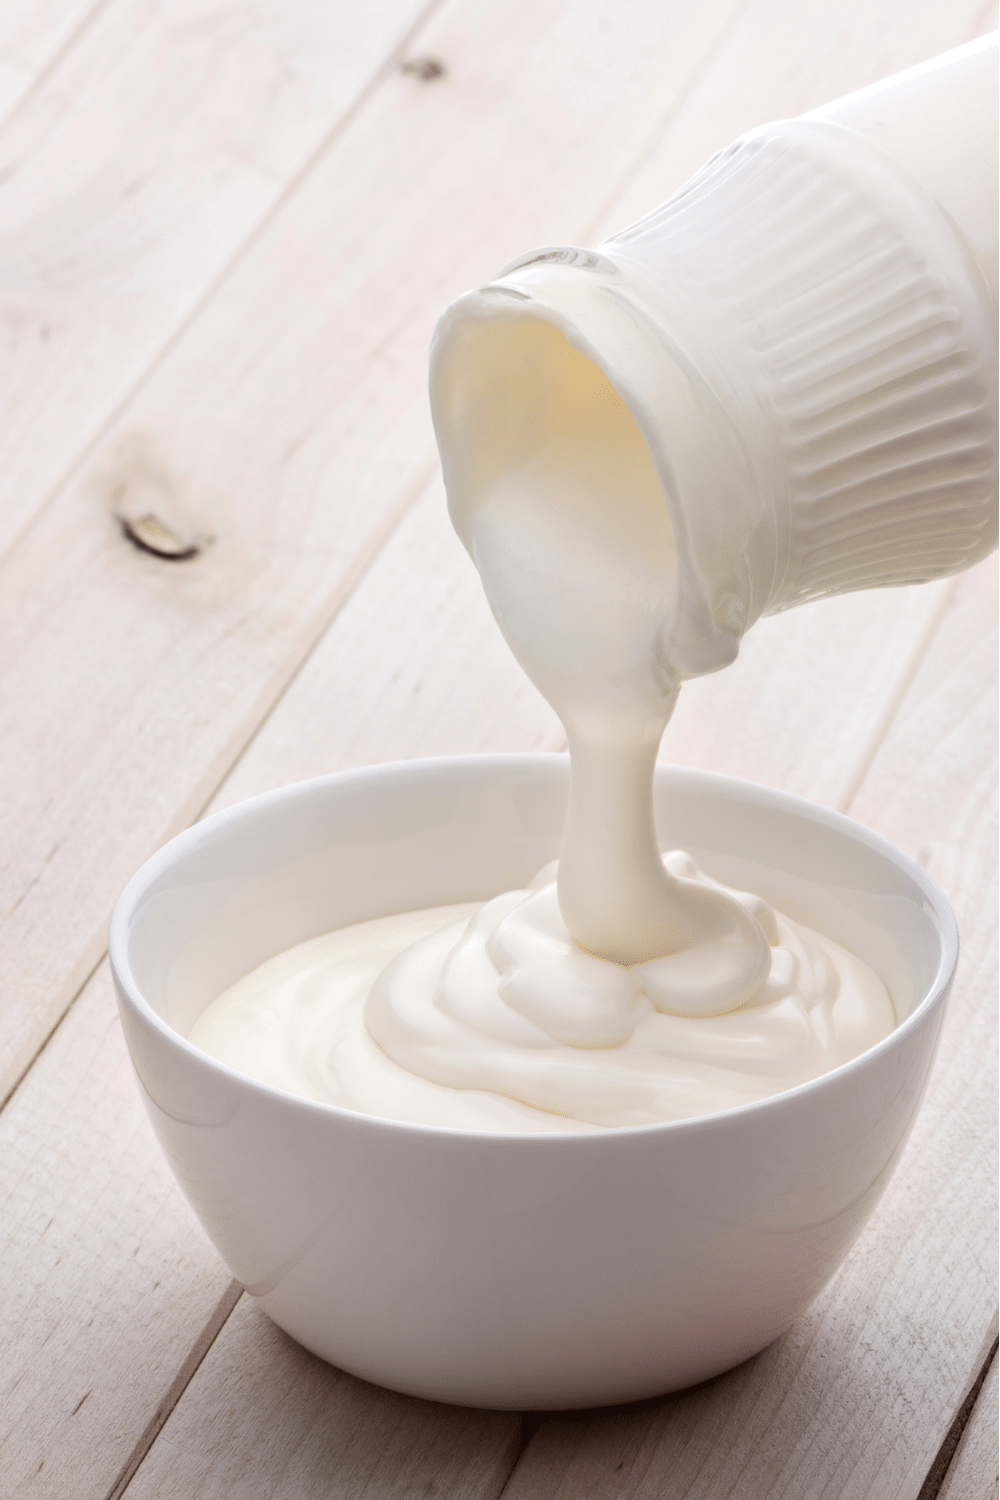 Say Hello to Healthier Options With the Best Sour Cream Substitutes